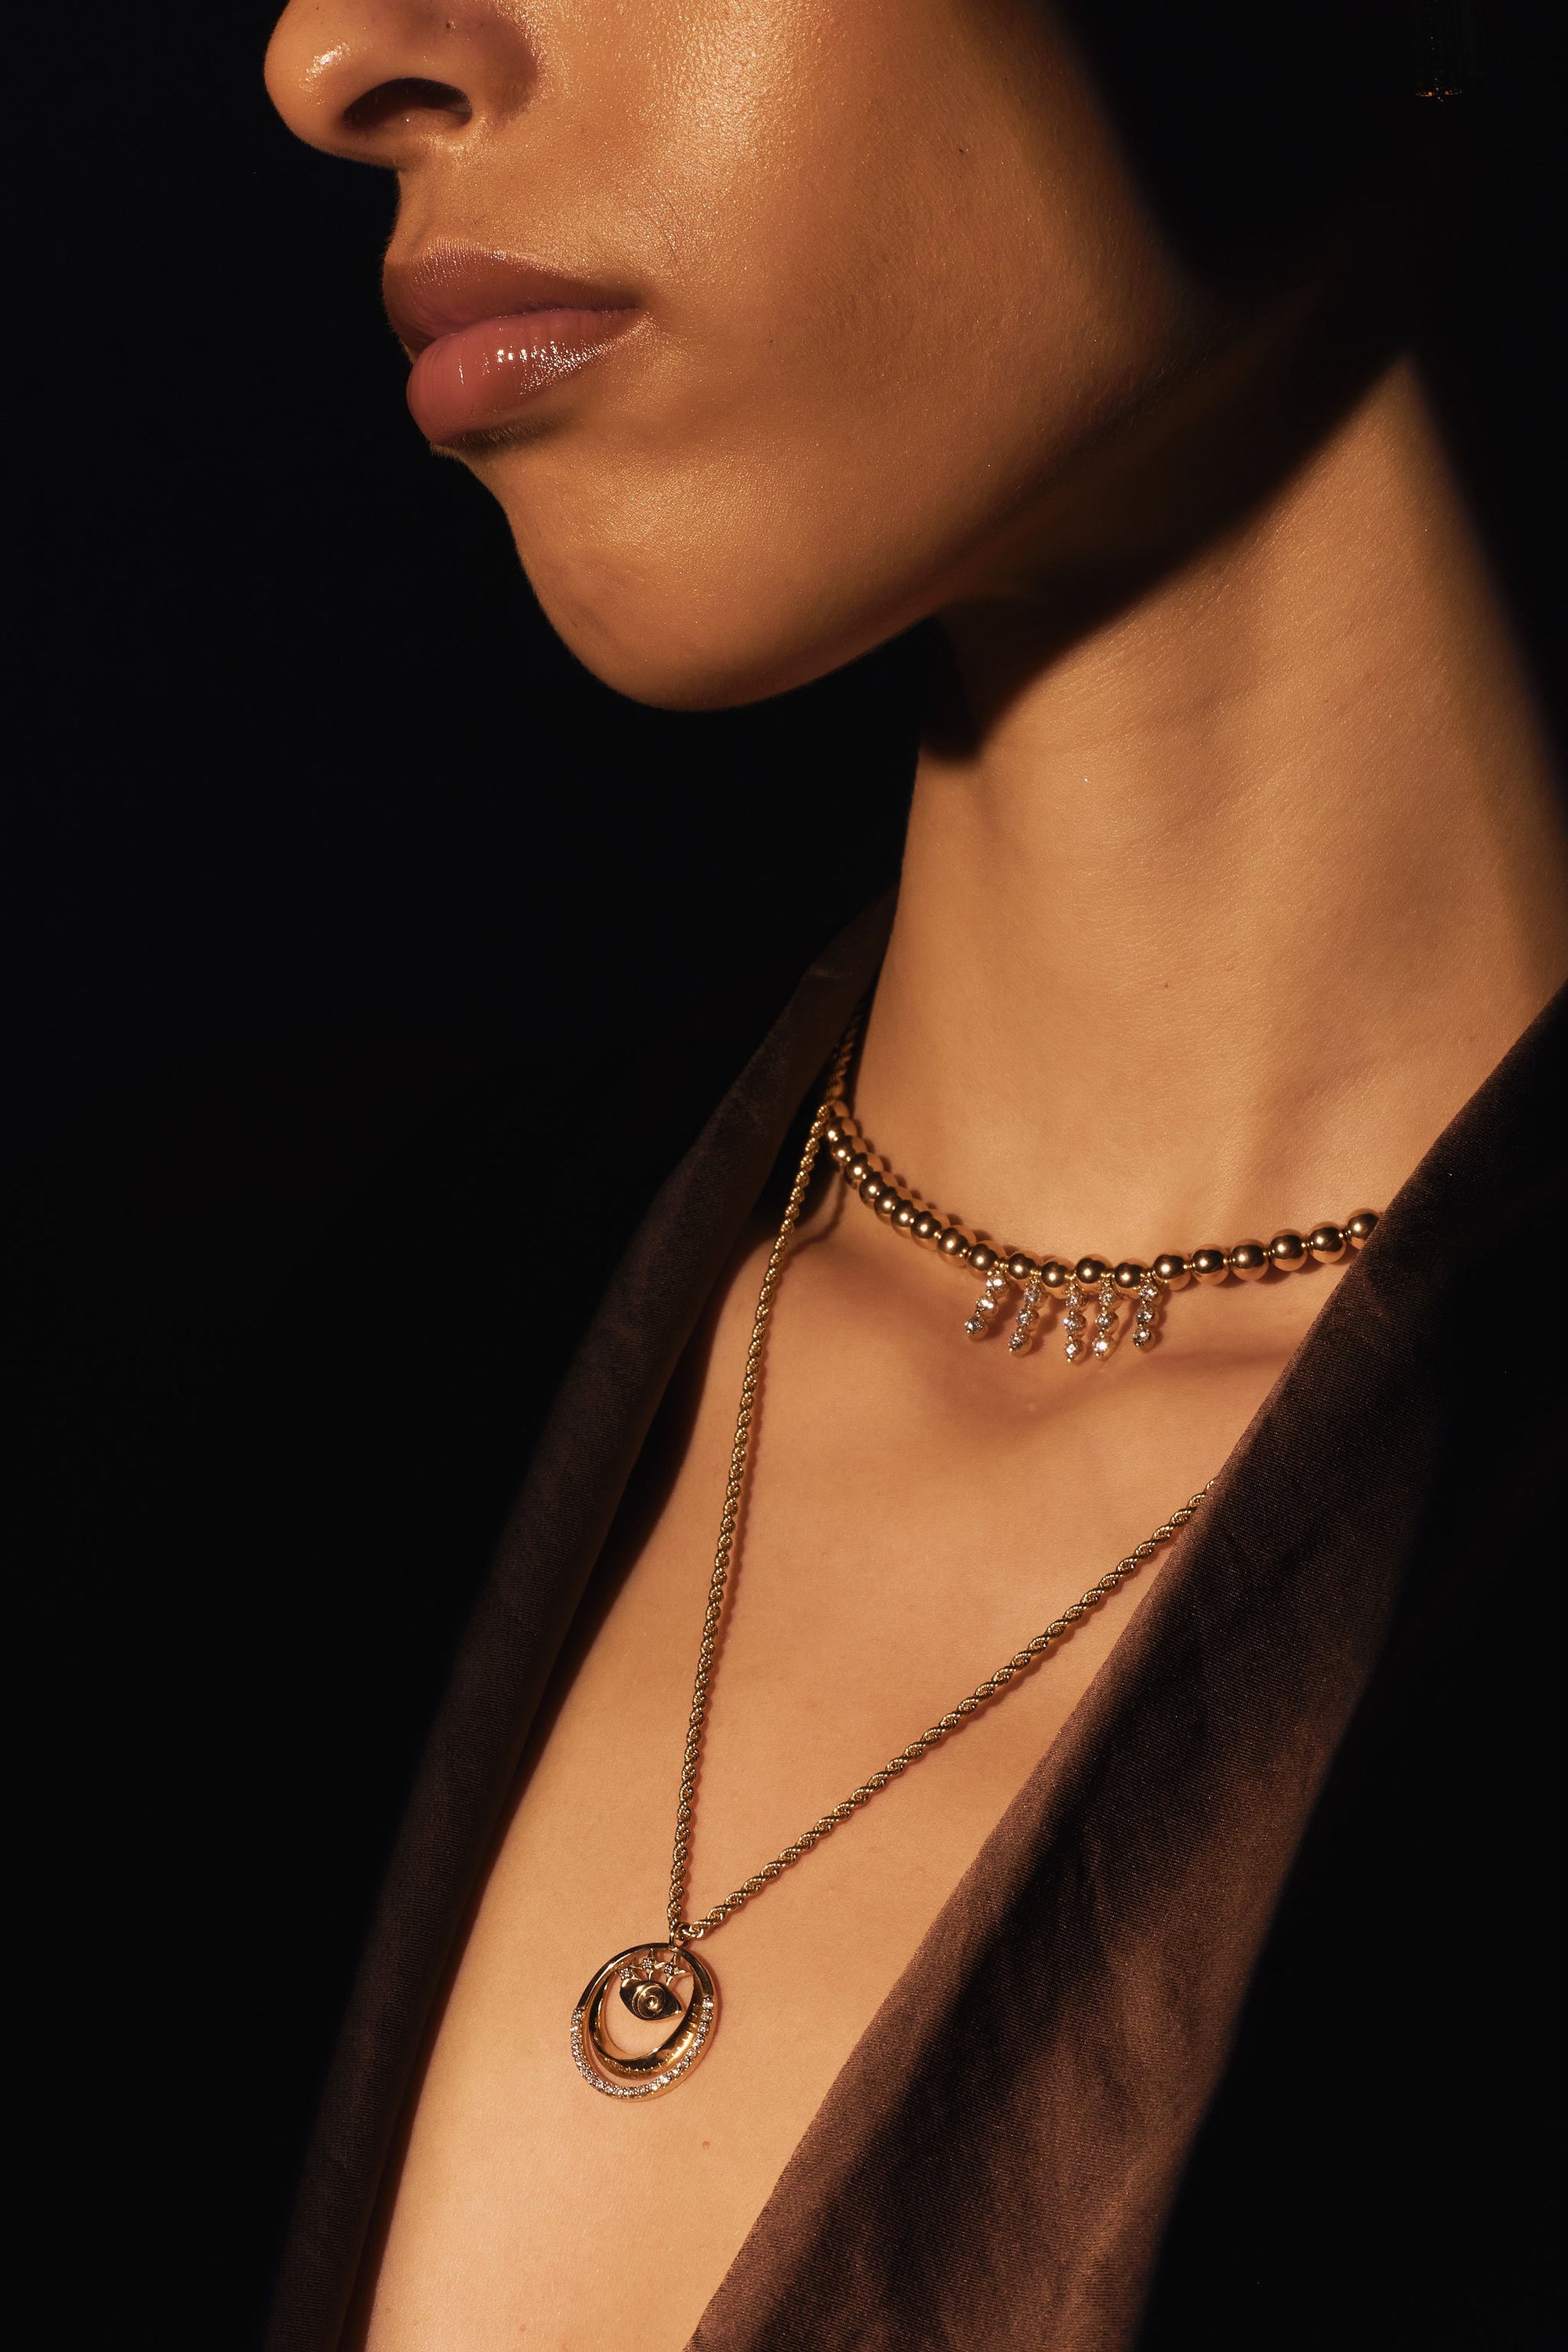 Close-up of a person&#39;s neck and lower face, highlighting two necklaces: one is the &quot;Sticks and Gold Stones - Yellow Gold Beads and Diamond Necklace&quot; from Nijma M Fine Jewelry, featuring vibrant gold beads with small dangling charms, while the other is a longer chain with a pendant showcasing two interlocking rings. The low lighting accentuates both the jewelry and the skin&#39;s texture.